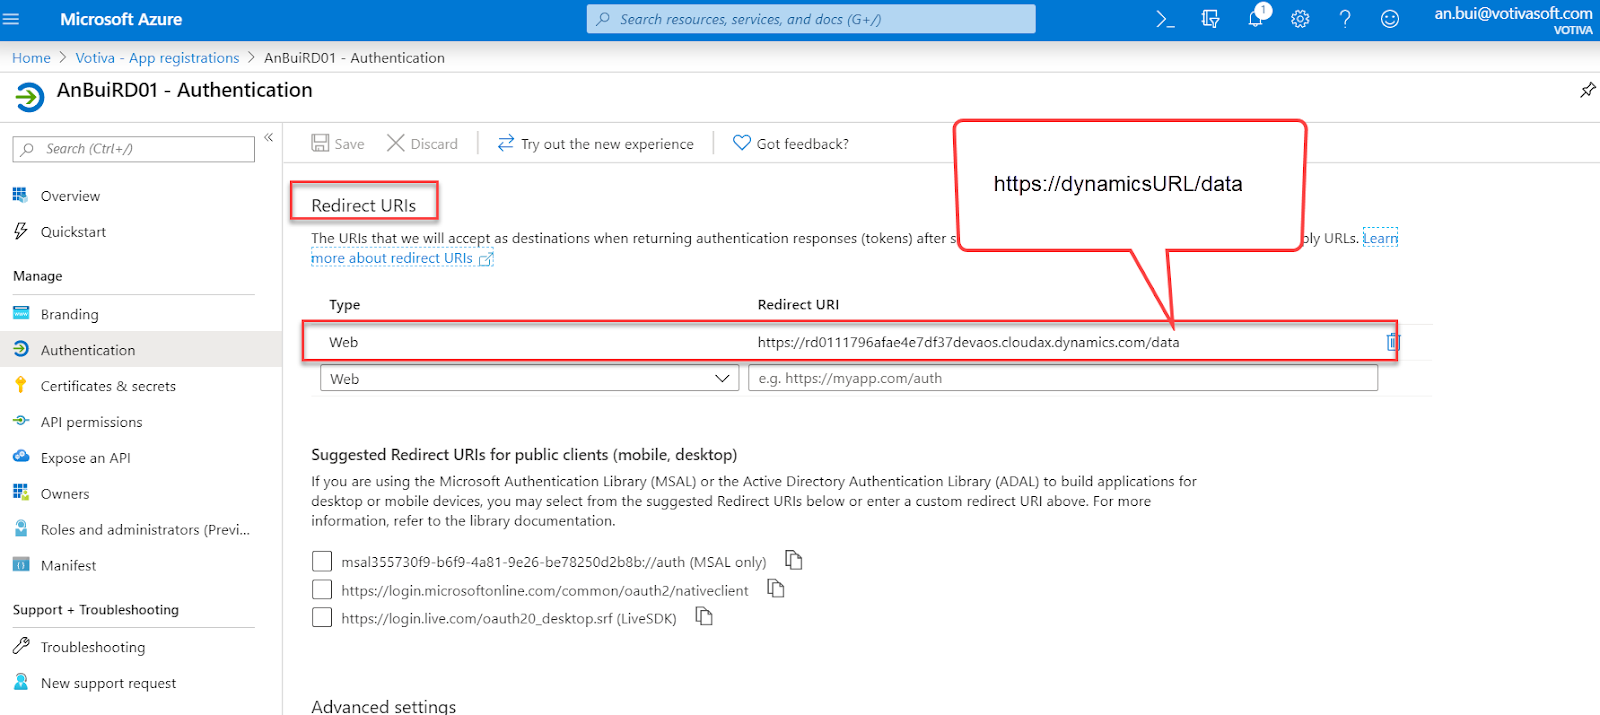 Microsoft Azure 
Home > Votiva - App registrations > AnBuiRD01 
AnBuiRD01 - Authentication 
Search resources, services, and docs (G +1') 
- Authentication 
>_ 
https://dynamicsURL/data 
an.bui@votivasoft.com 
p Search (Ctrl +7) 
Overview 
Quickstart 
Manage 
Branding 
Authentication 
Certificates & secrets 
API permissions 
Expose an API 
Owners 
Roles and administrators (Previ... 
Manifest 
Support + Troubleshooting 
Troubleshooting 
a New support request 
e] Save X Discard 
Redirect URIS 
Try out the new experience 
C) Got feedback? 
The URIS that we will accept as destinations when returning authentication responses (tokens) after s 
ly URLs. 
tnor_s _a>put r$iyect UNIS 
Type 
Web 
Web 
Redirect URI 
https://rd0111796afae4e7df37devaos.cIoudax.dynamics.com/data 
e.g. https://myapp.com/auth 
Suggested Redirect URIS for public clients (mobile, desktop) 
If you are using the Microsoft Authentication Library (MSAL) or the Active Directory Authentication Library (ADAL) to build applications for 
desktop or mobile devices, you may select from the suggested Redirect URIS below or enter a custom redirect URI above. For more 
information, refer to the library documentation. 
msa1355730f9-b6f9-4a81-9e26-be78250d2b8b://auth (MSAL only) 
https://login.microsoftonline.com/common/oauth2/nativeclient 
https://login.live.com/oauth20_desktop.srf (LiveSDK) 
Advanced settinqs